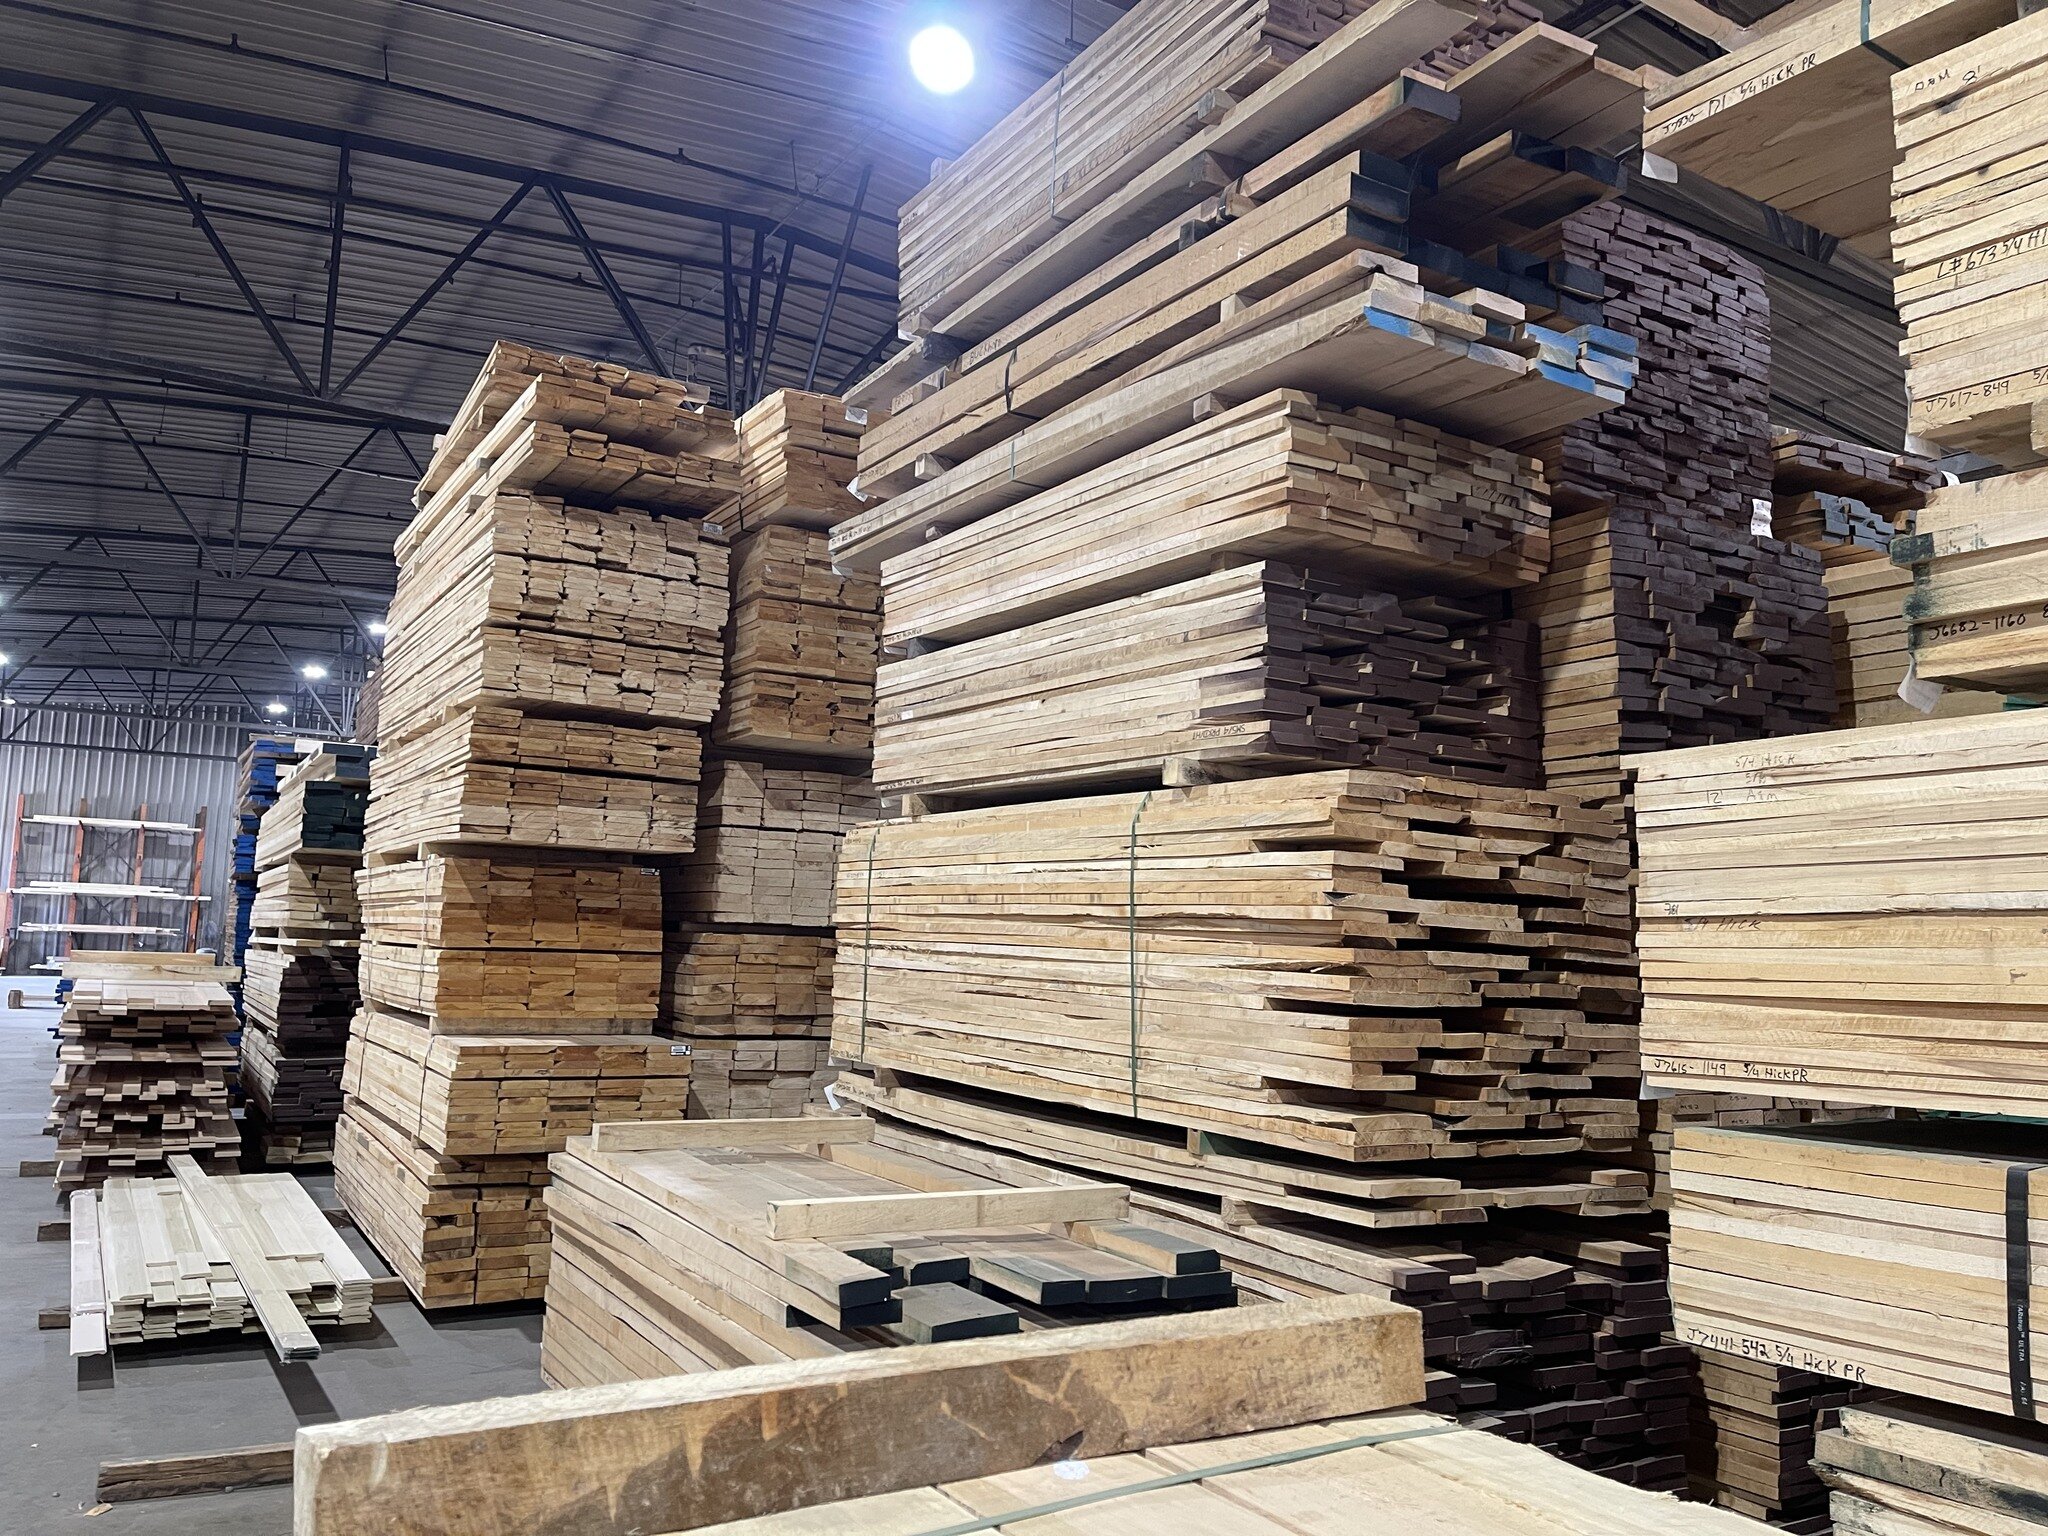 Purchased some beautiful Maple for a couple of projects that are next-up. Here's a million dollar view for you. Quite literally - and this is just one tiny, tiny section of one of the warehouses. We work with one of the largest mills in the area for 